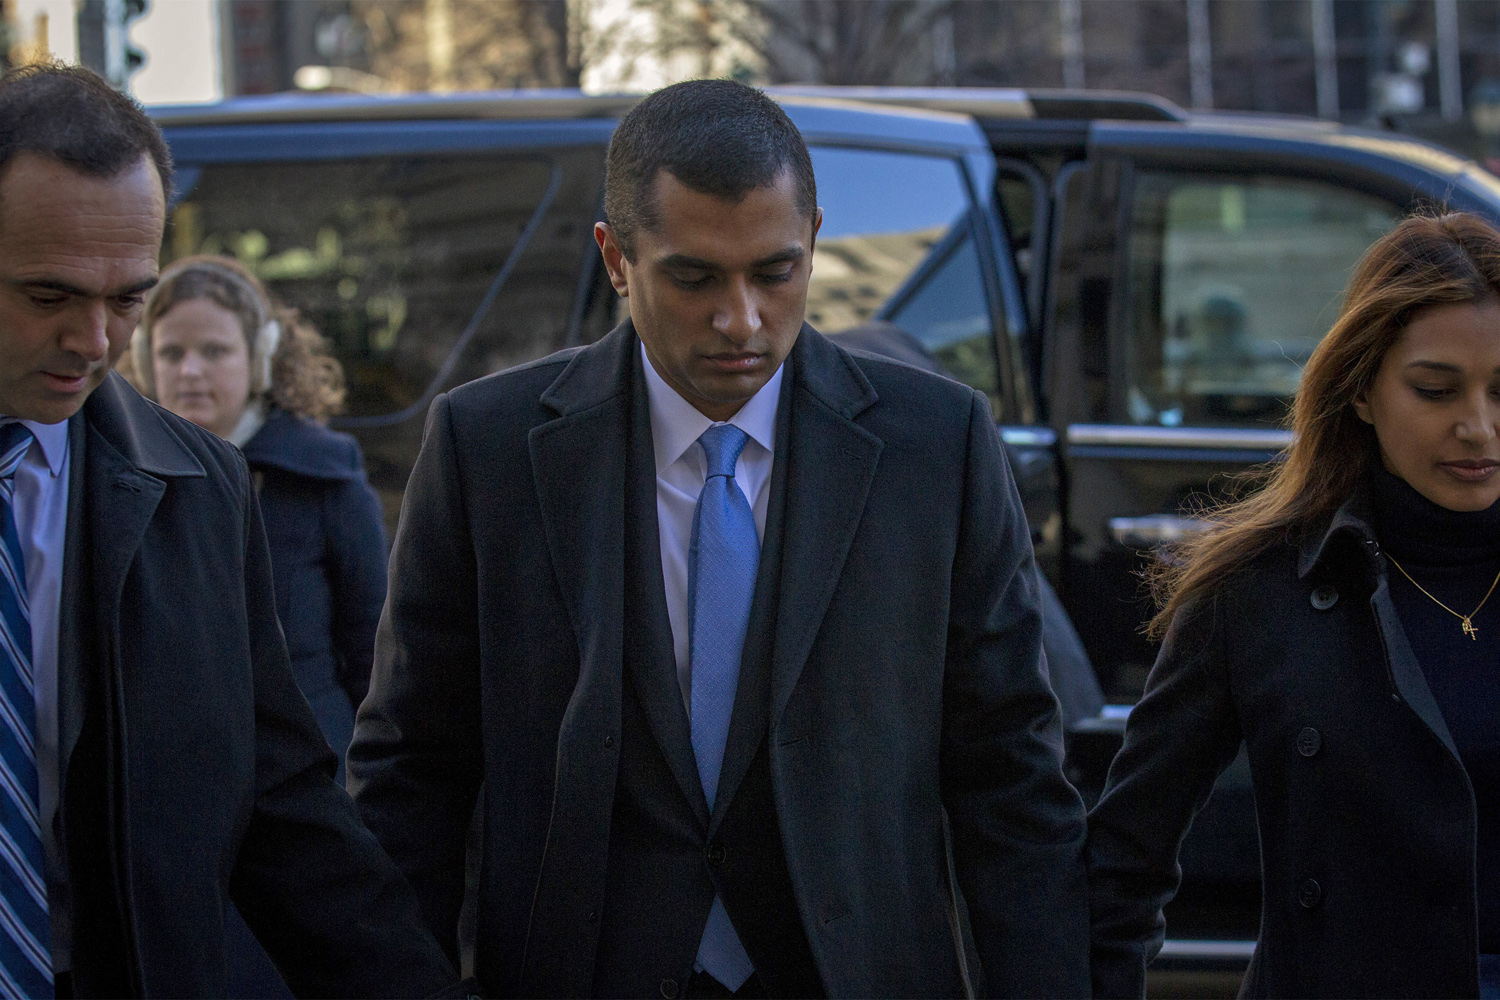 Former SAC Capital portfolio manager Mathew Martoma (C) arrives at the Manhattan Federal Courthouse with his lawyer in New York, January 7, 2014. Martoma is charged with using confidential information provided by two doctors involved in clinical trial to trade in drug companies Elan Corp Plc and Wyeth, which is now owned by Pfizer Inc.